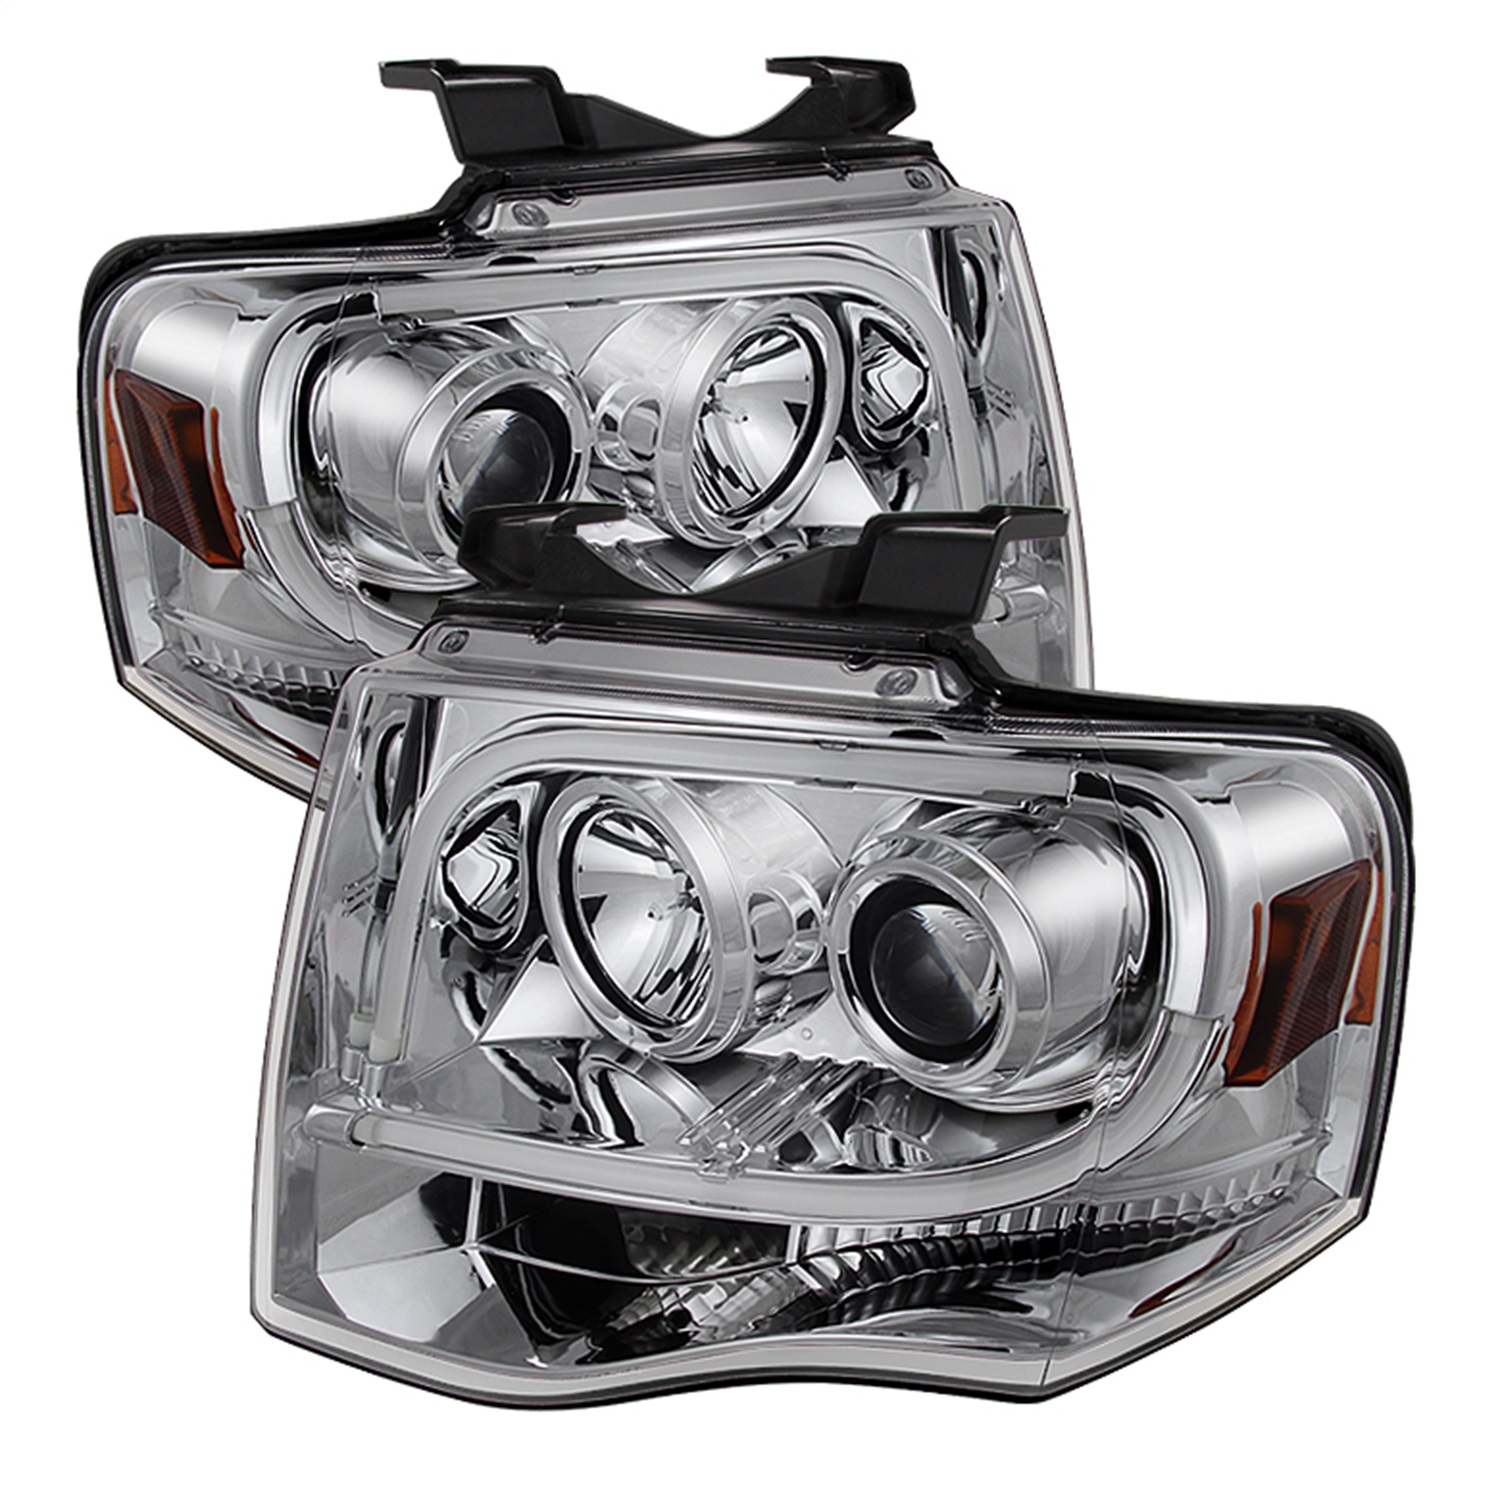 Spyder Auto 5079510 DRL Projector Headlights Fits 07-13 Expedition